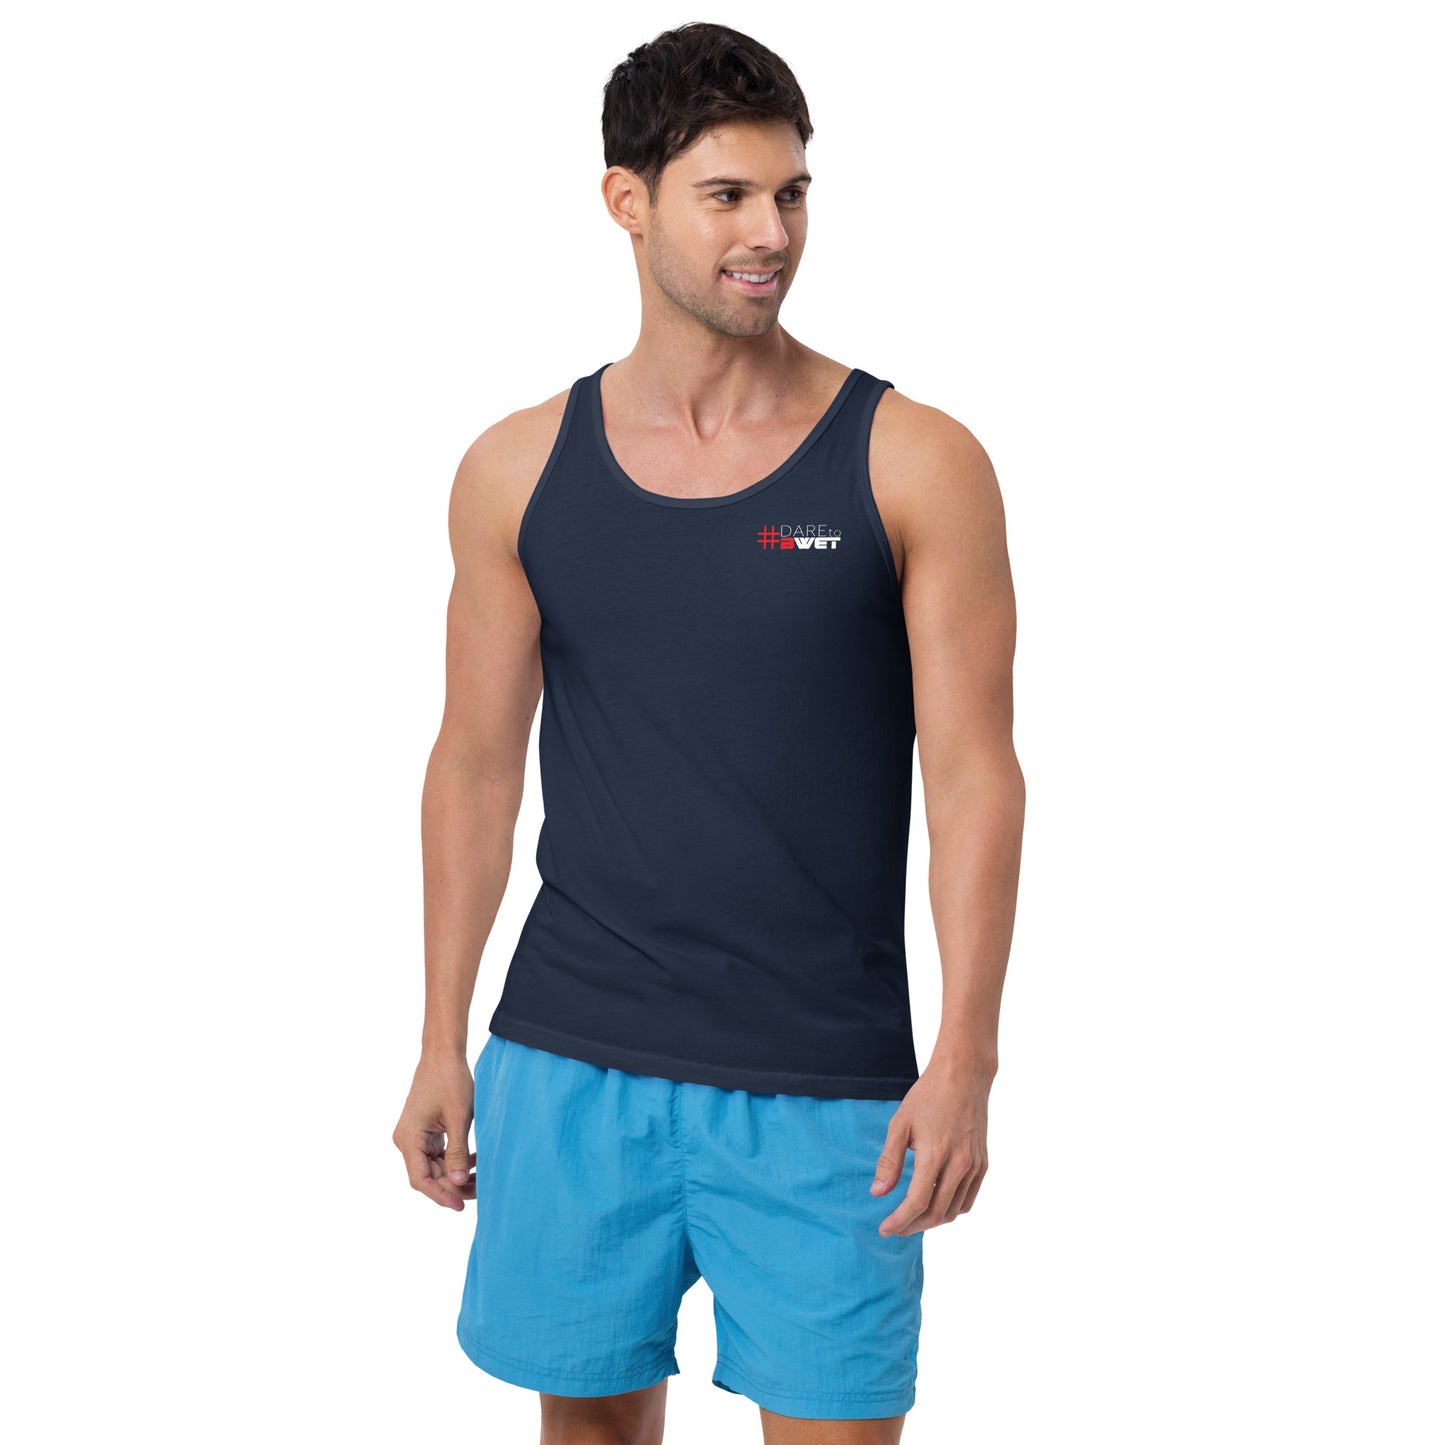 Introducing the BWET Beach Tank Top: Unparalleled Quality and Irresistibly Soft Fabric! 😍